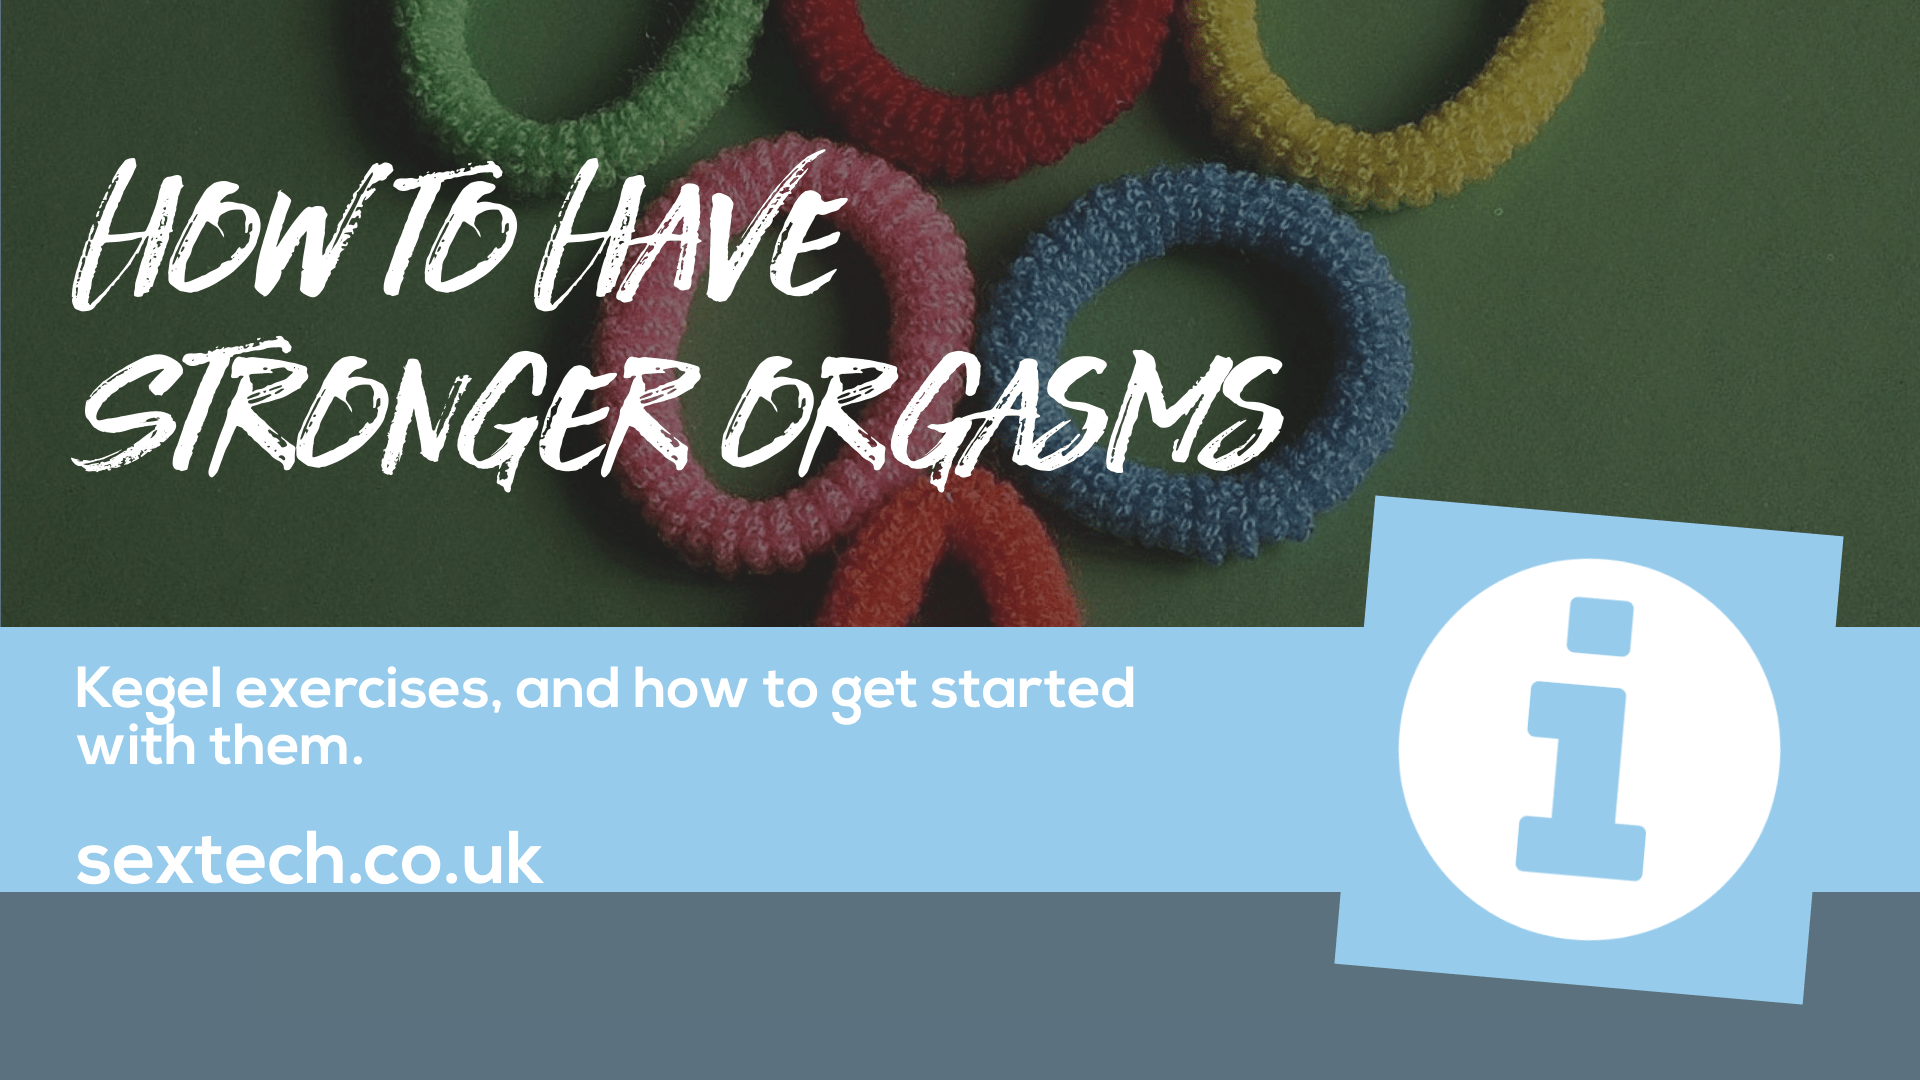 Want stronger orgasms? Train your pelvic floor with kegel exercises